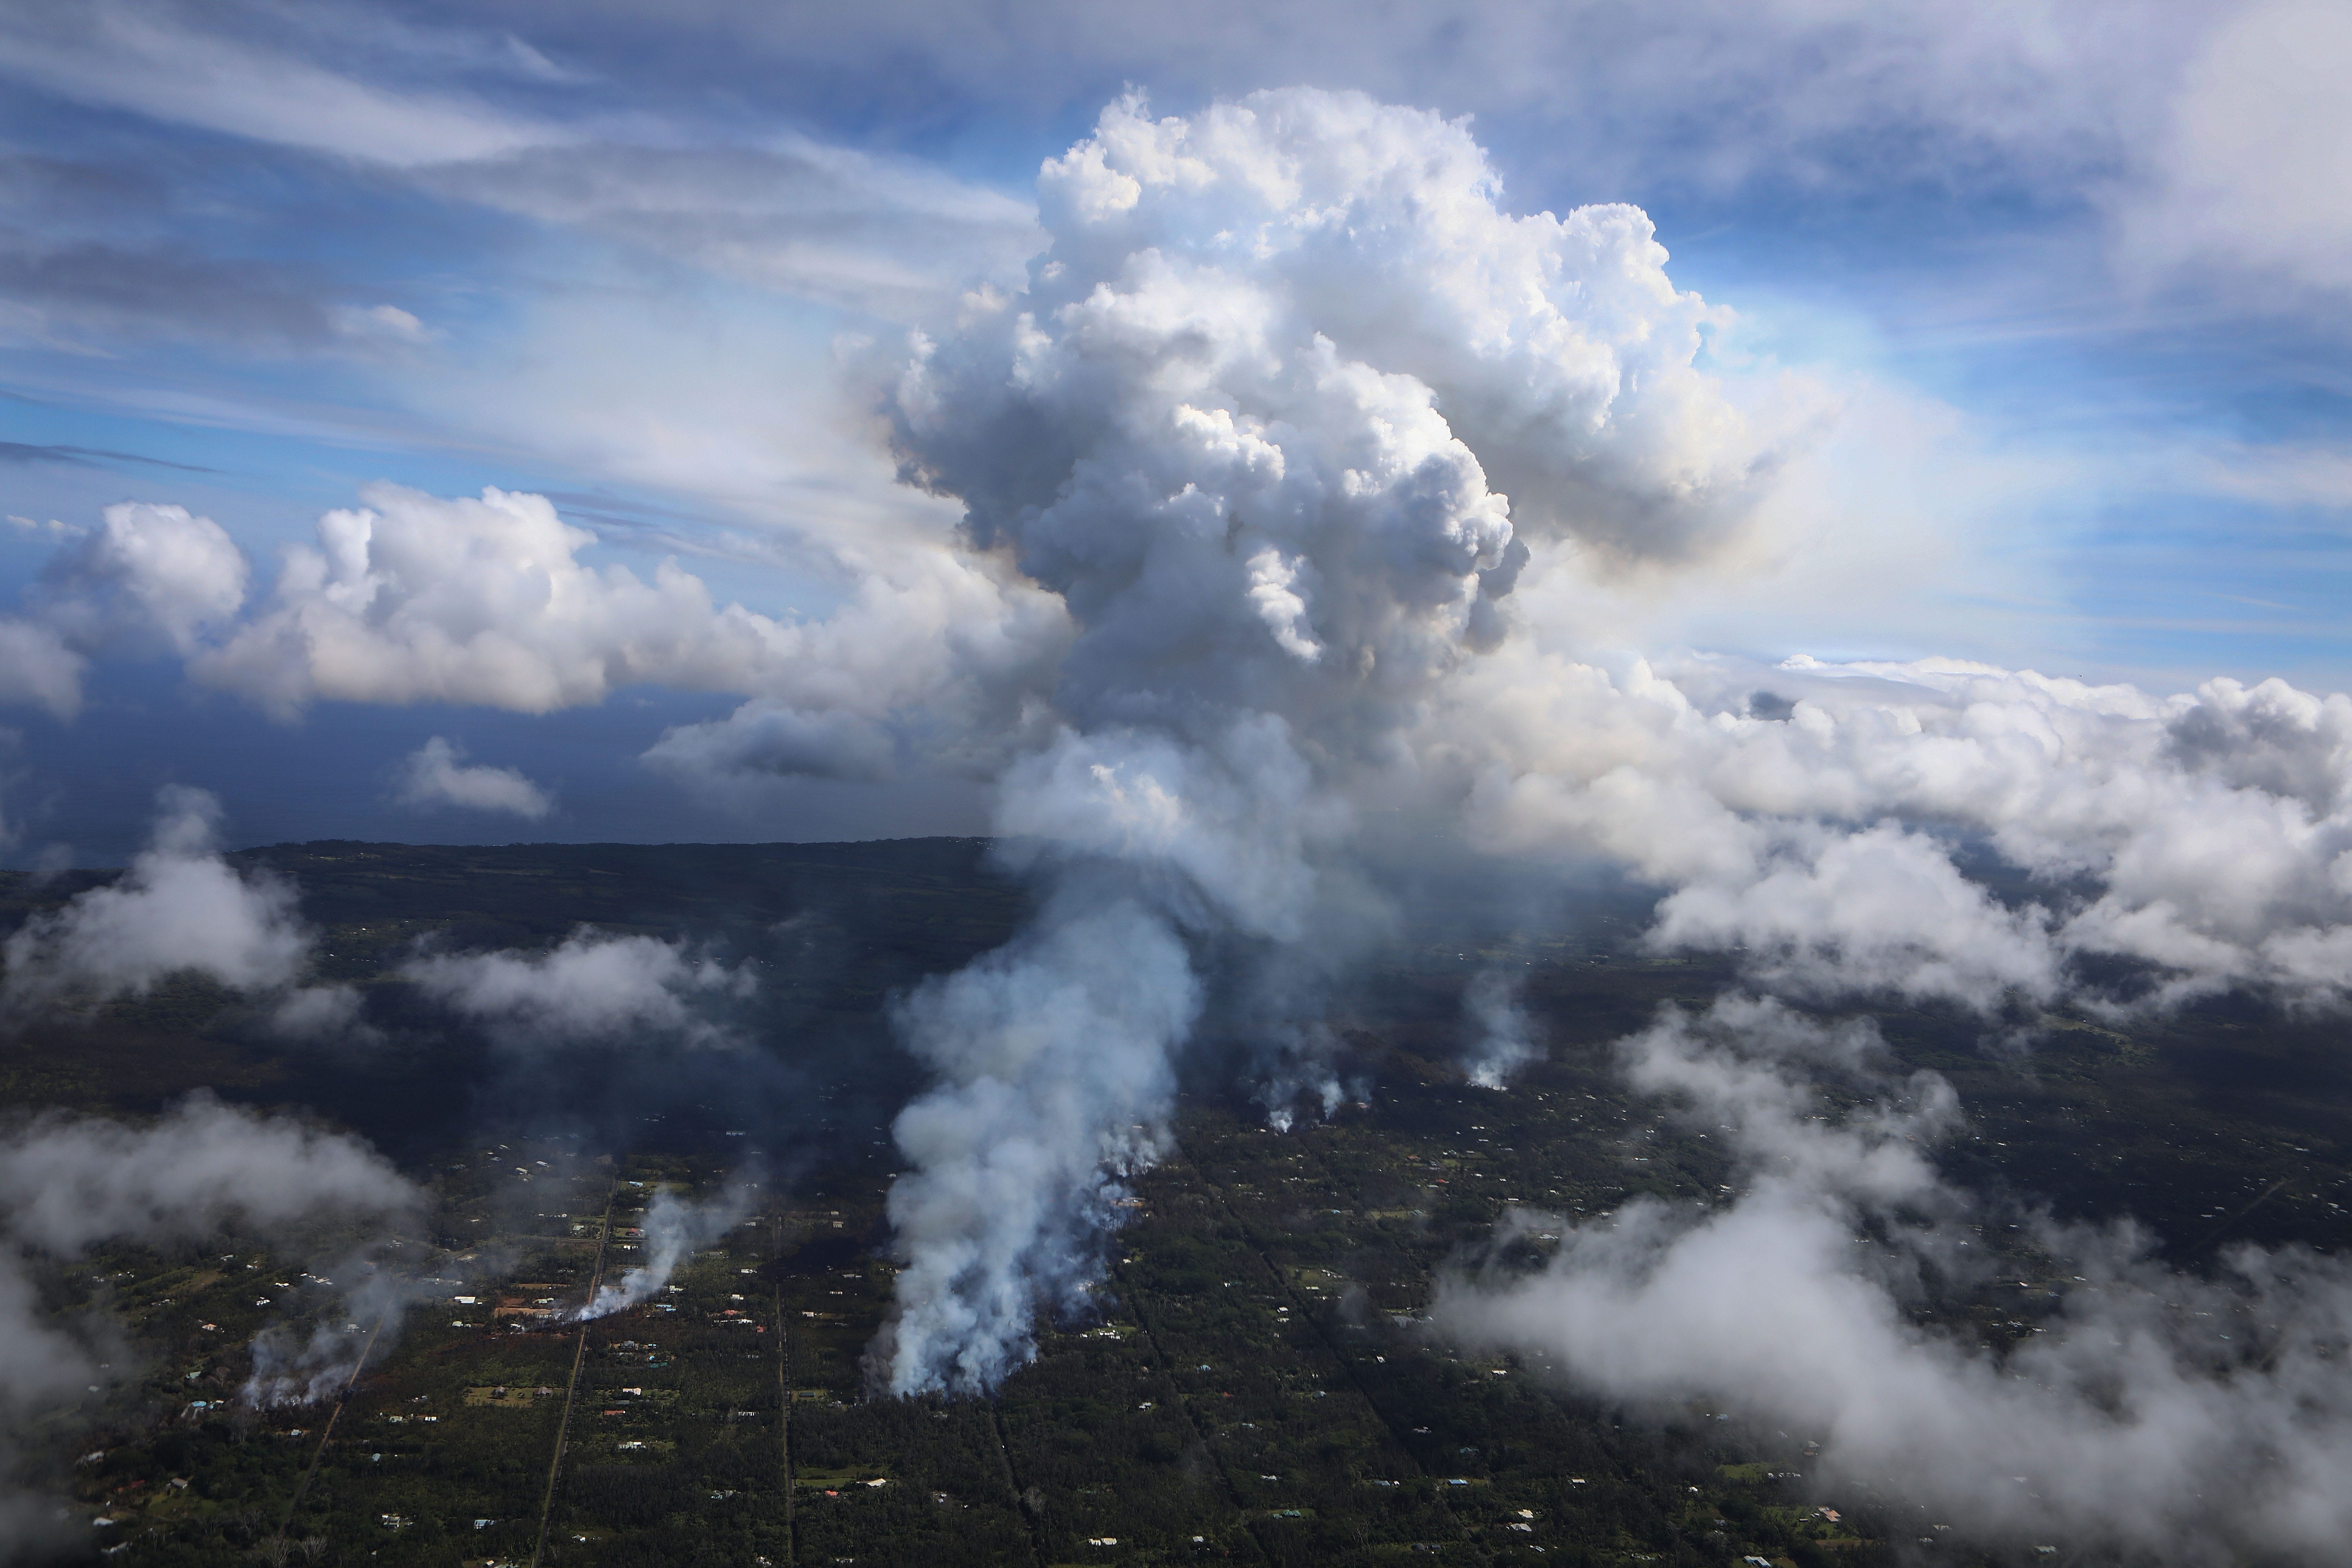 A plume of volcanic gas mixed with smoke from fires caused by lava rises (C) amidst clouds in the Leilani Estates neighborhood in the aftermath of eruptions from the Kilauea volcano on Hawaii's Big Island on May 6, 2018 in Pahoa, Hawaii. A magnitude 